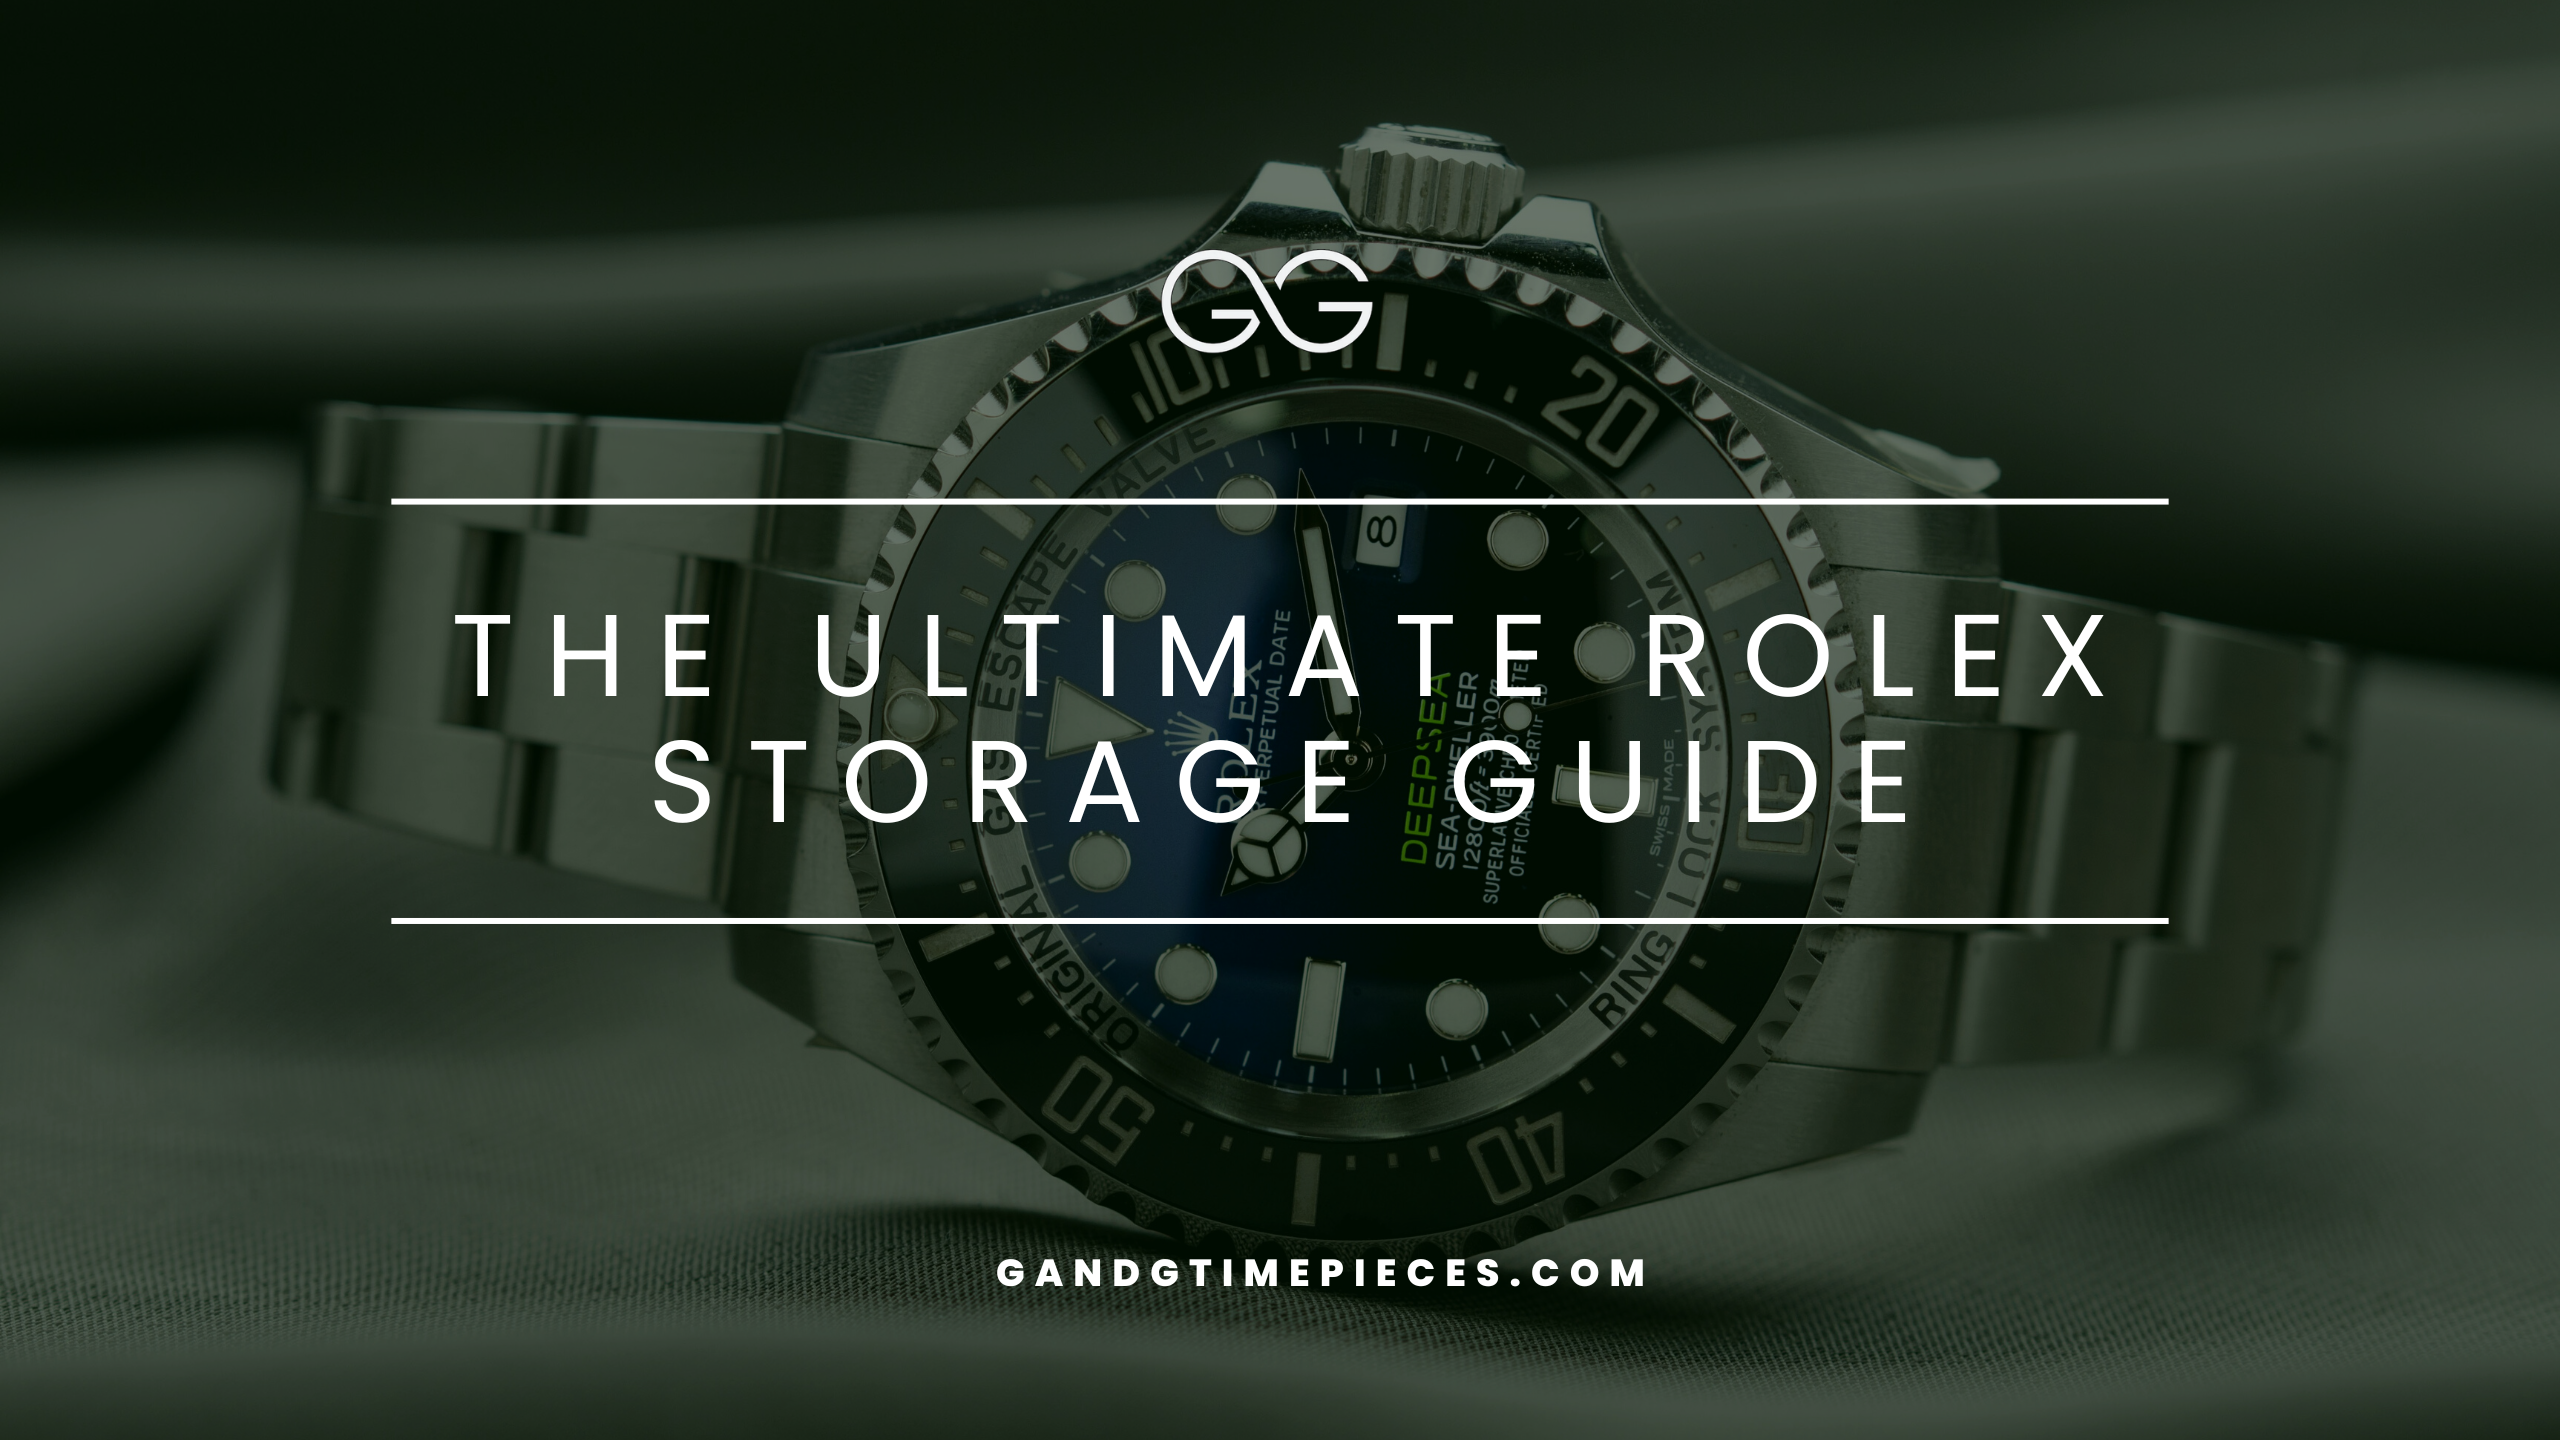 The Ultimate Rolex Storage Guide